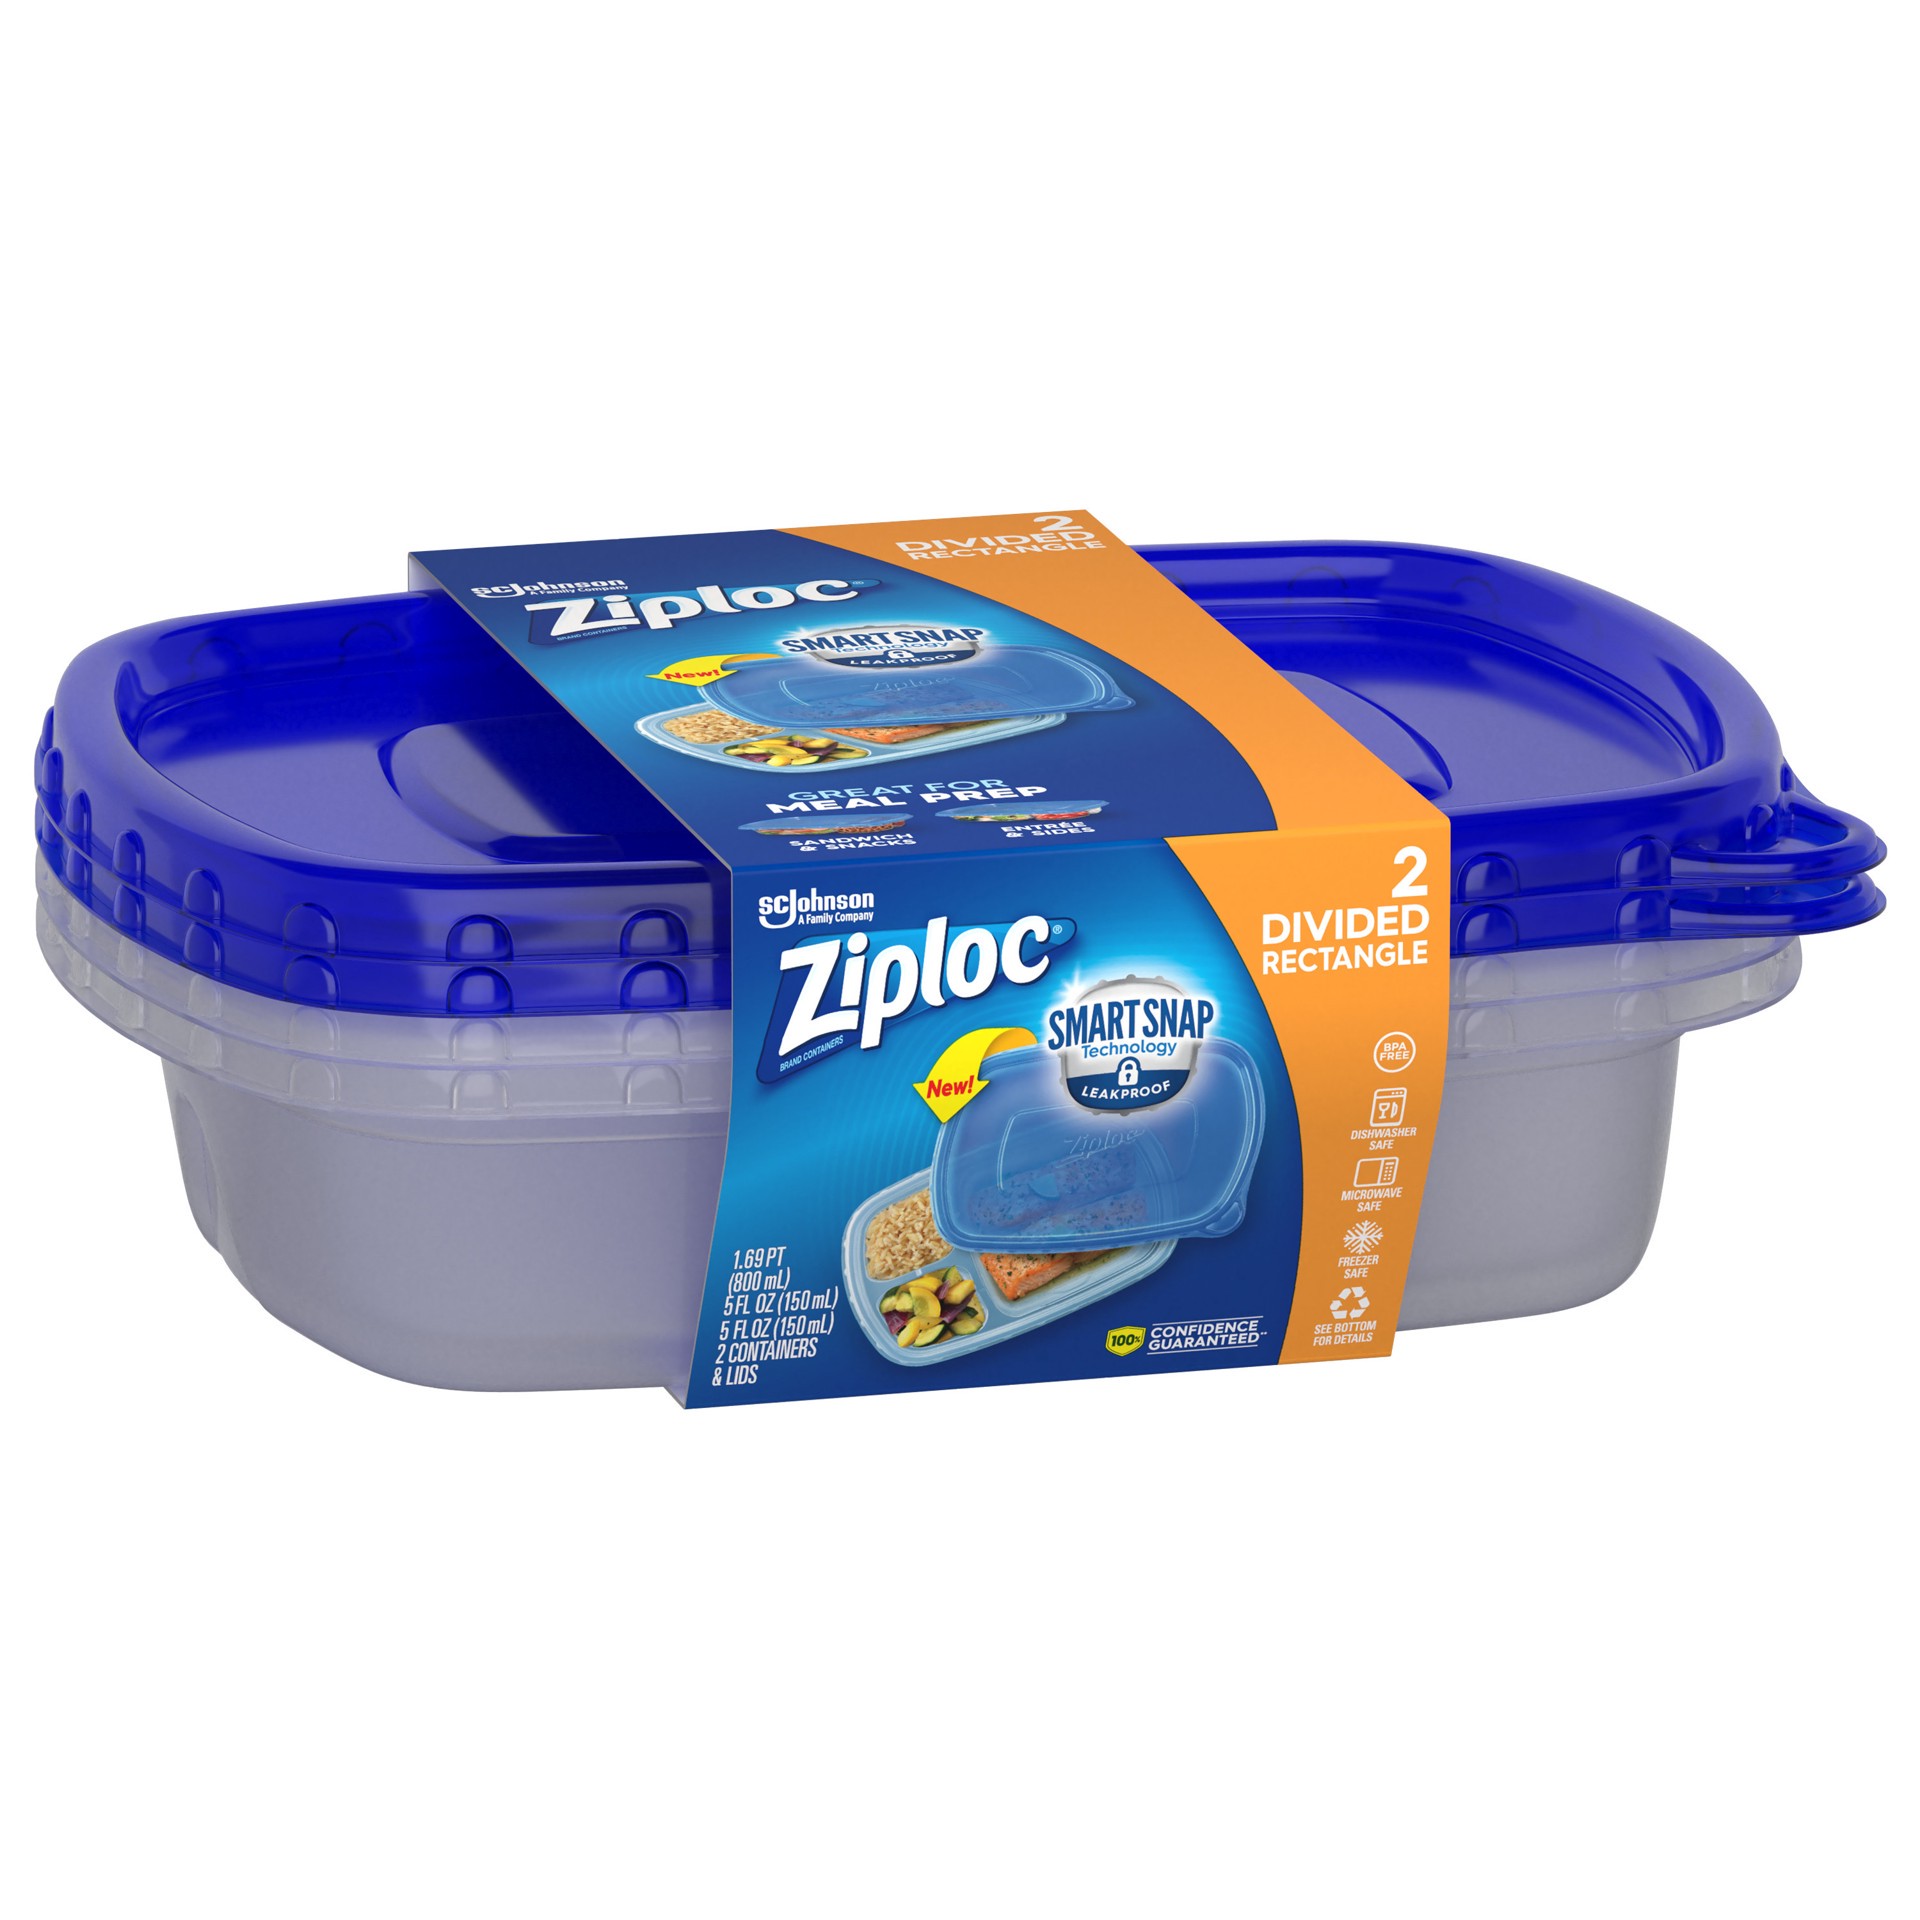 slide 2 of 5, Ziploc Smart Snap Divided Rectangle Containers & Lids 2 Containers & Lids, 2 ct